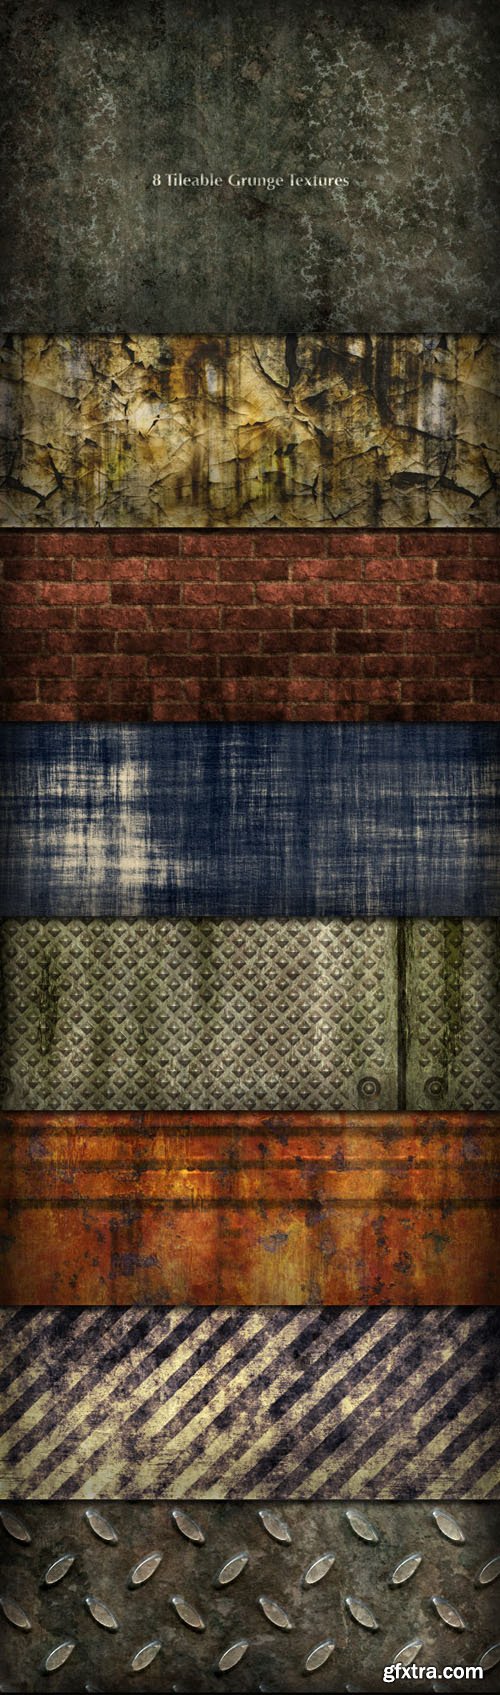 Tileable Grunge Patterns & Textures for Photoshop